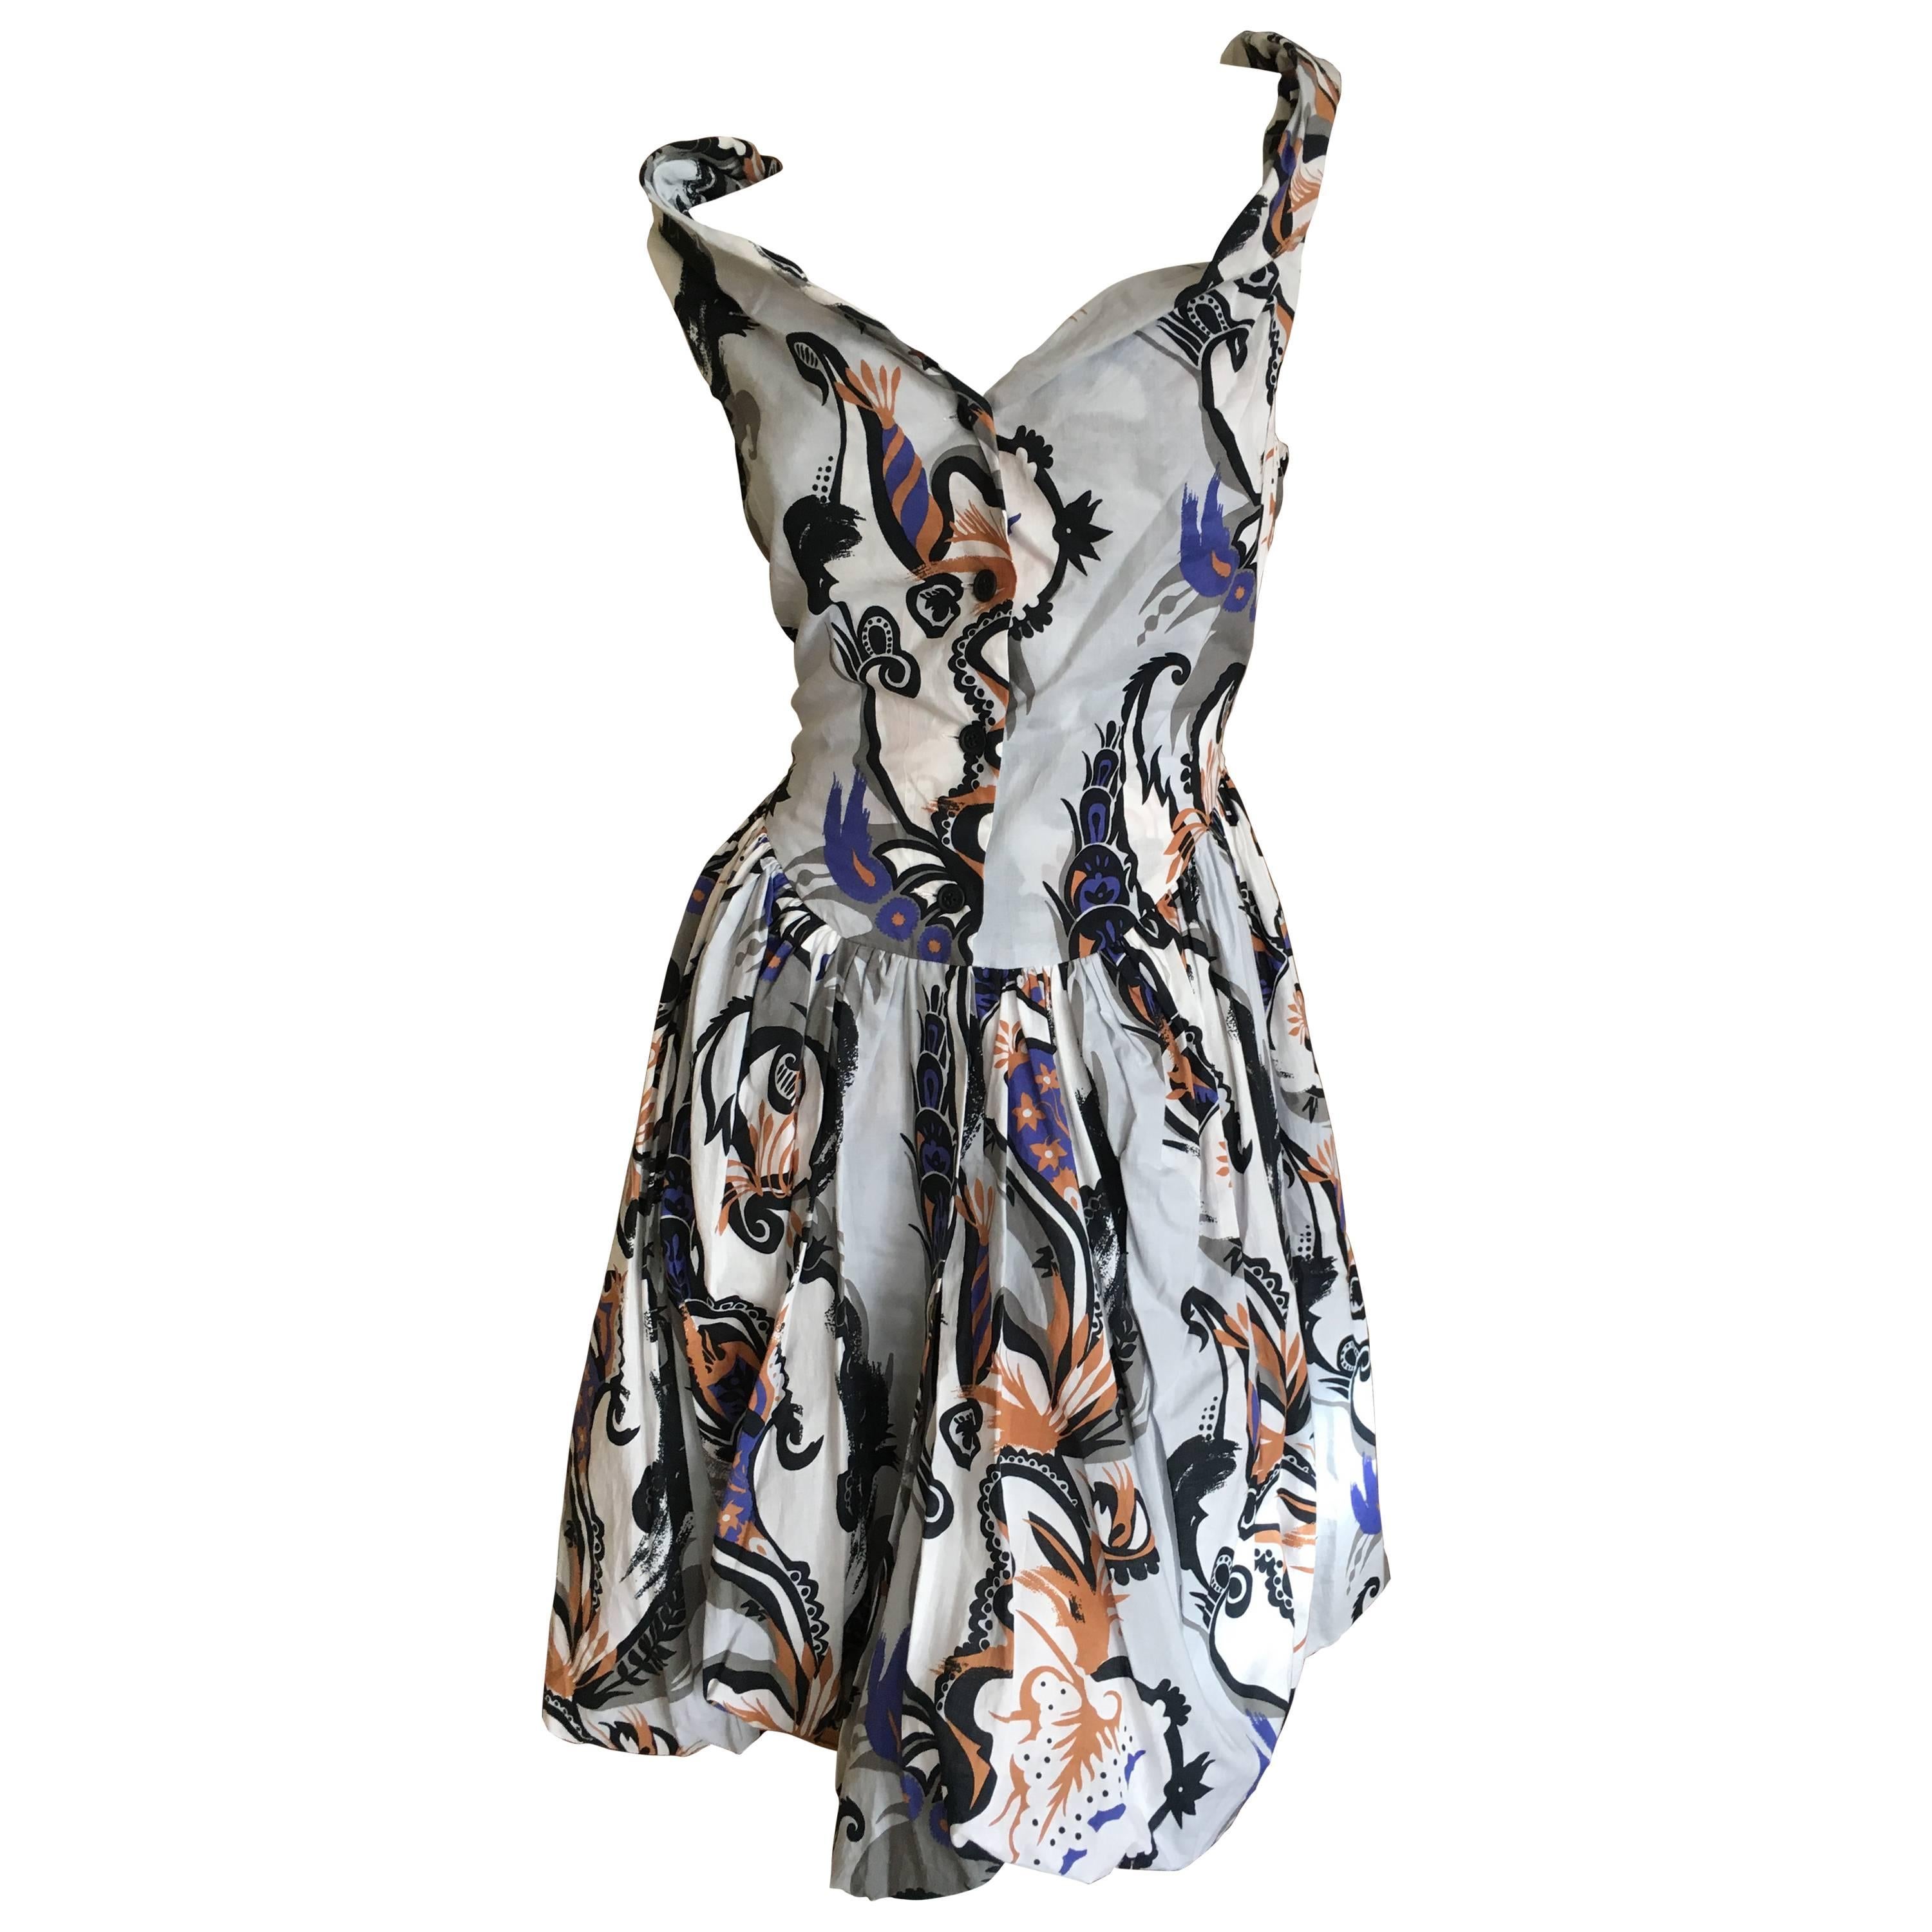 Vivienne Westwood Paisley Cotton "Bubbly" Day Dress for Anglomania Size 42 NWT For Sale